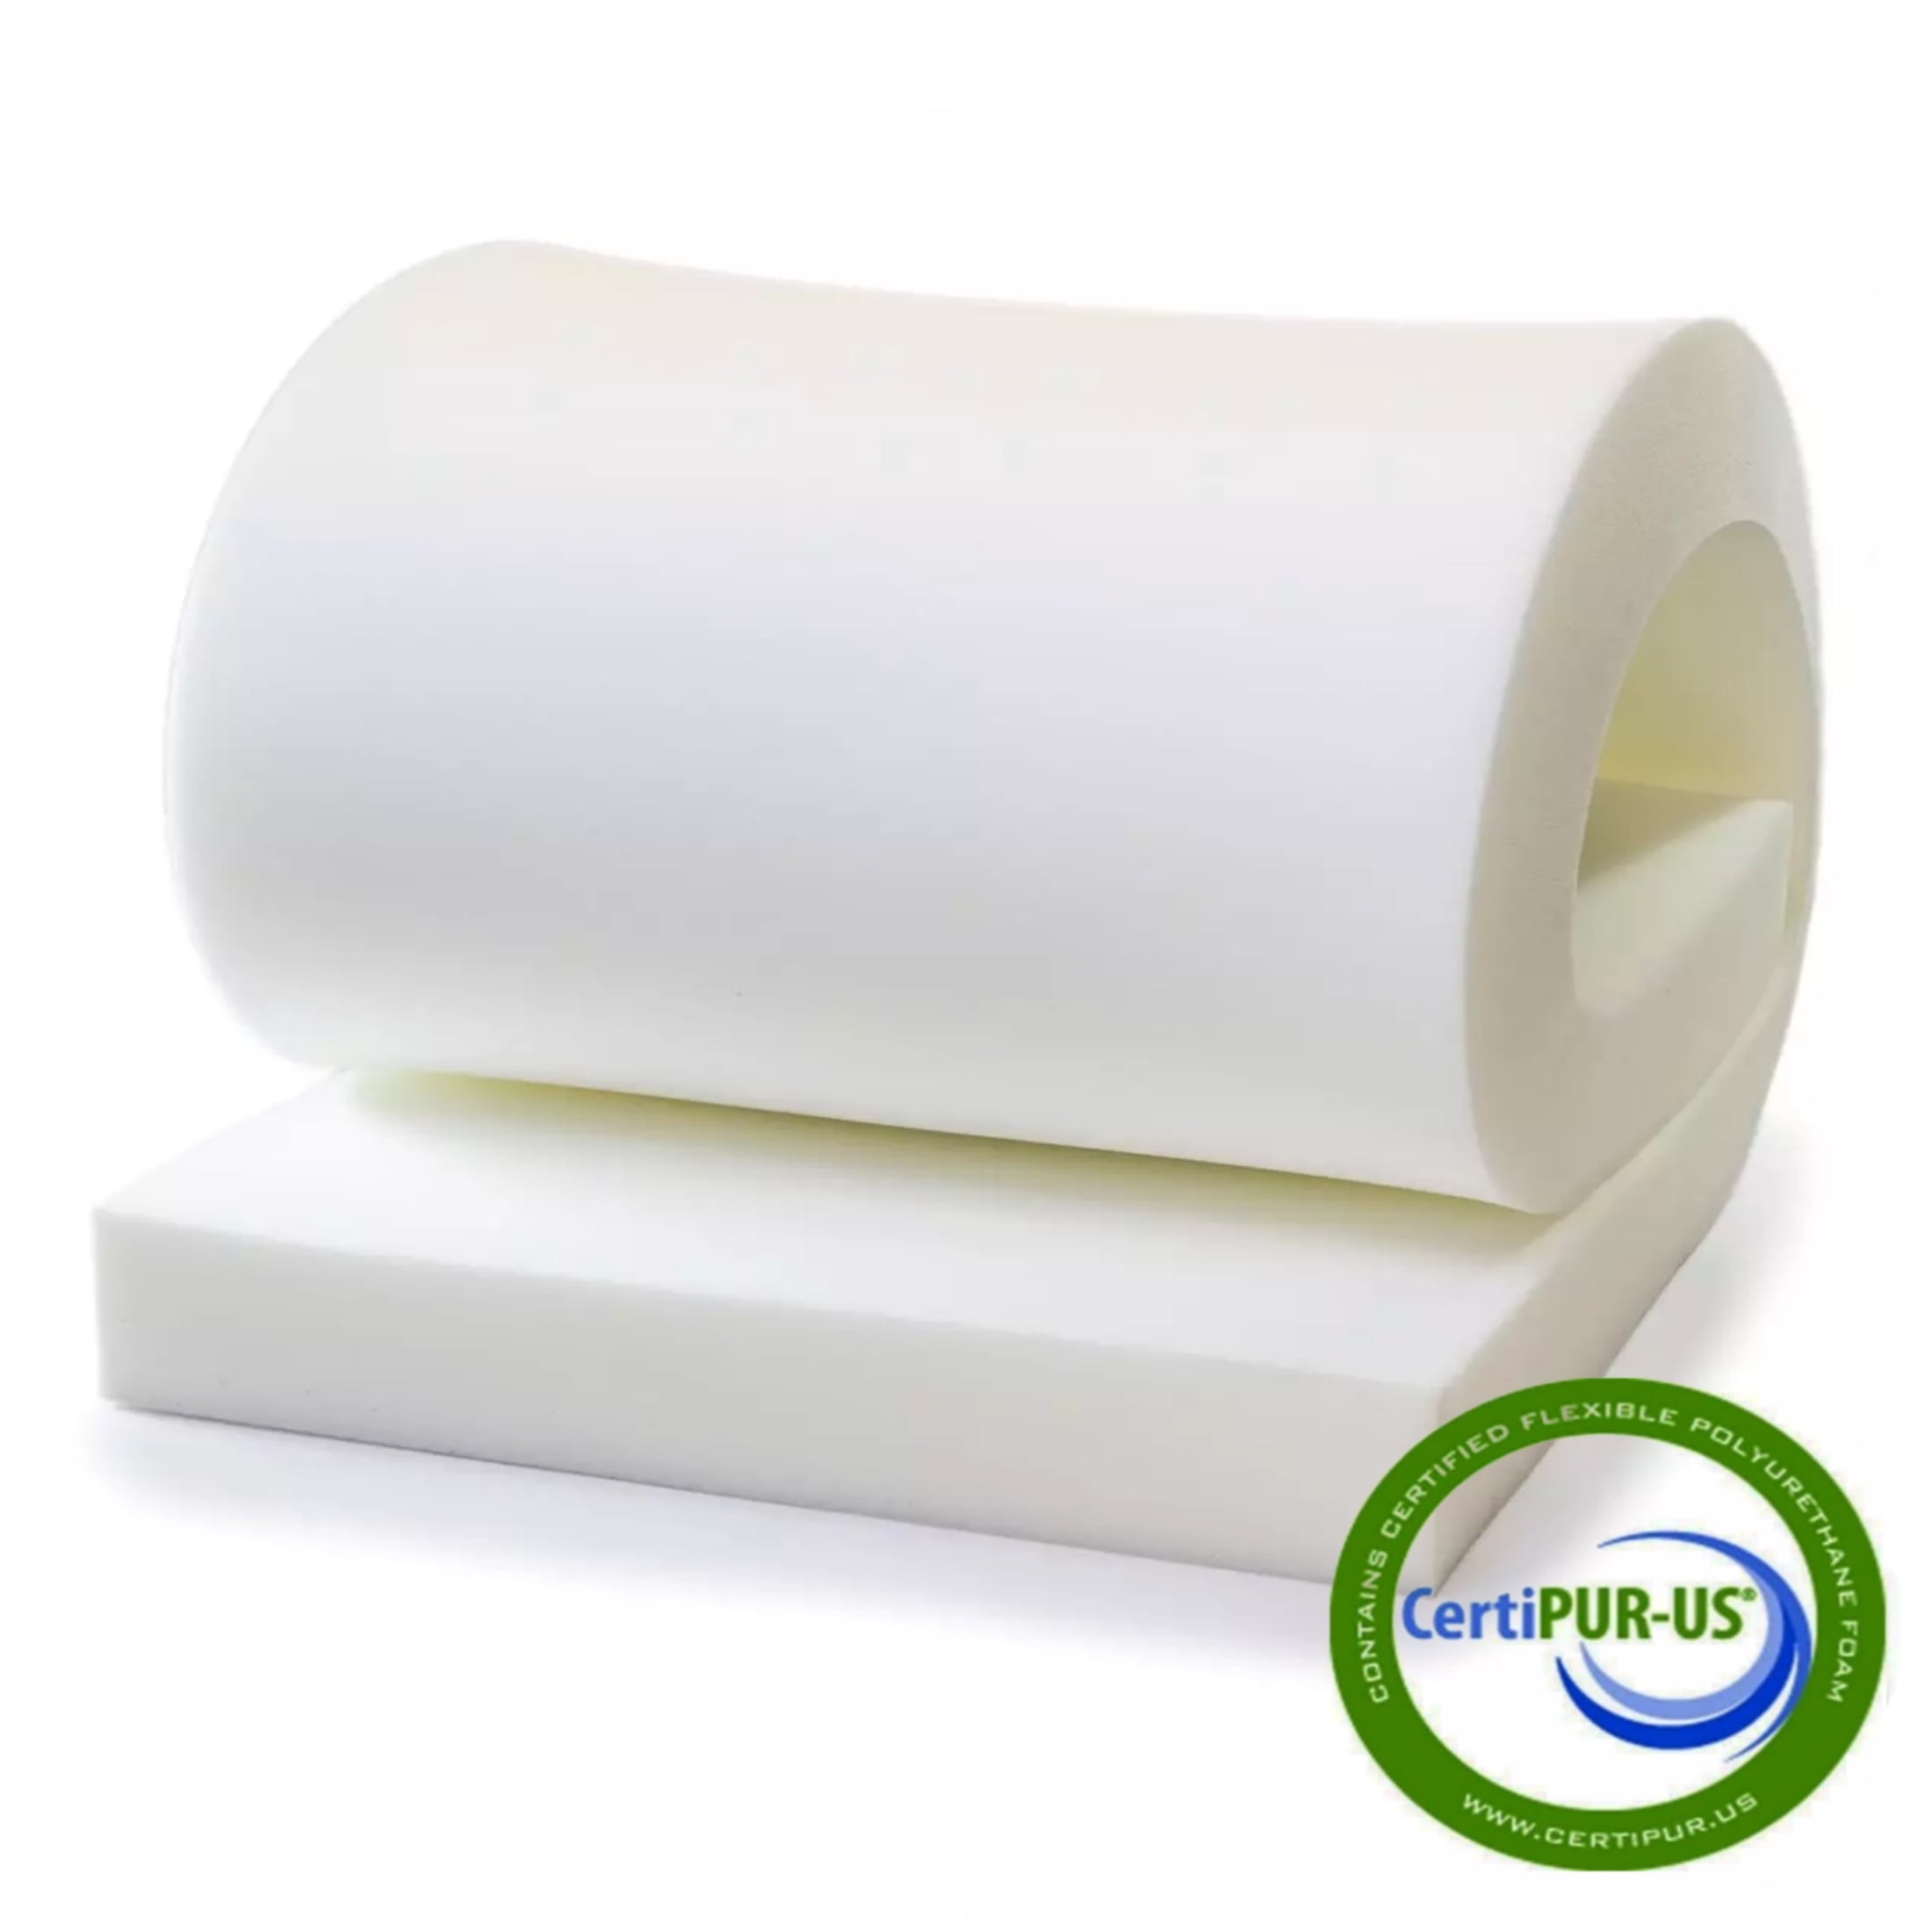 Cushion Foam Rubber Replacement Polyurethane Upholstery White Firm